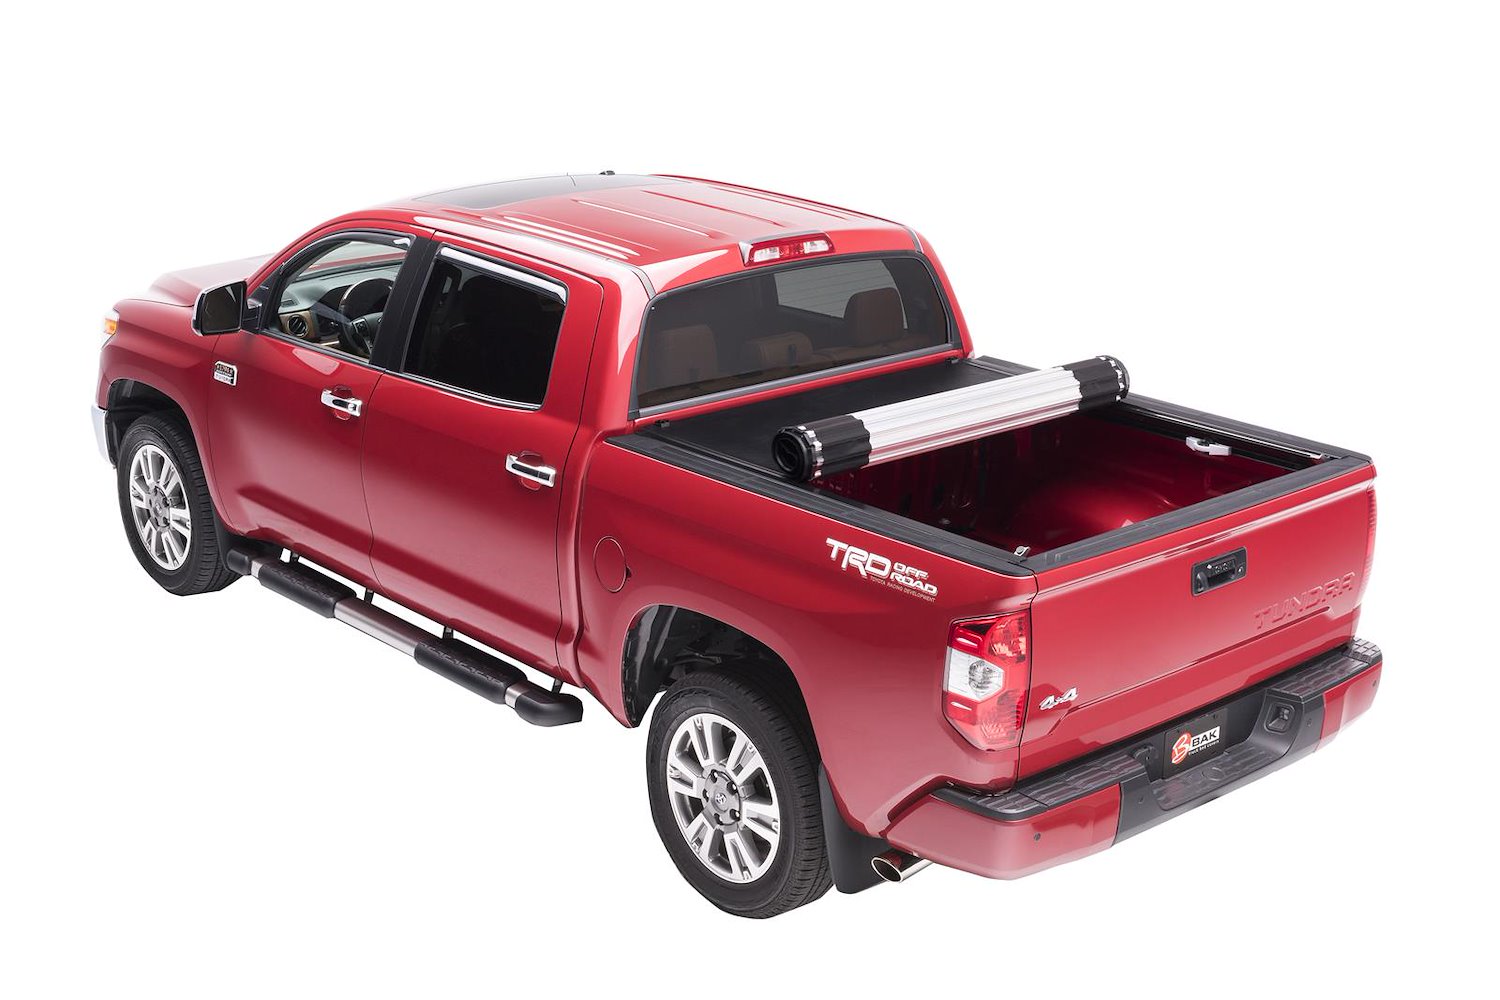 39410 Revolver X2 for 07-21 ToyotaTundra 6.7 ft. Bed w/o OE Track System, Roll-Up Hard Cover Style [Black Finish]